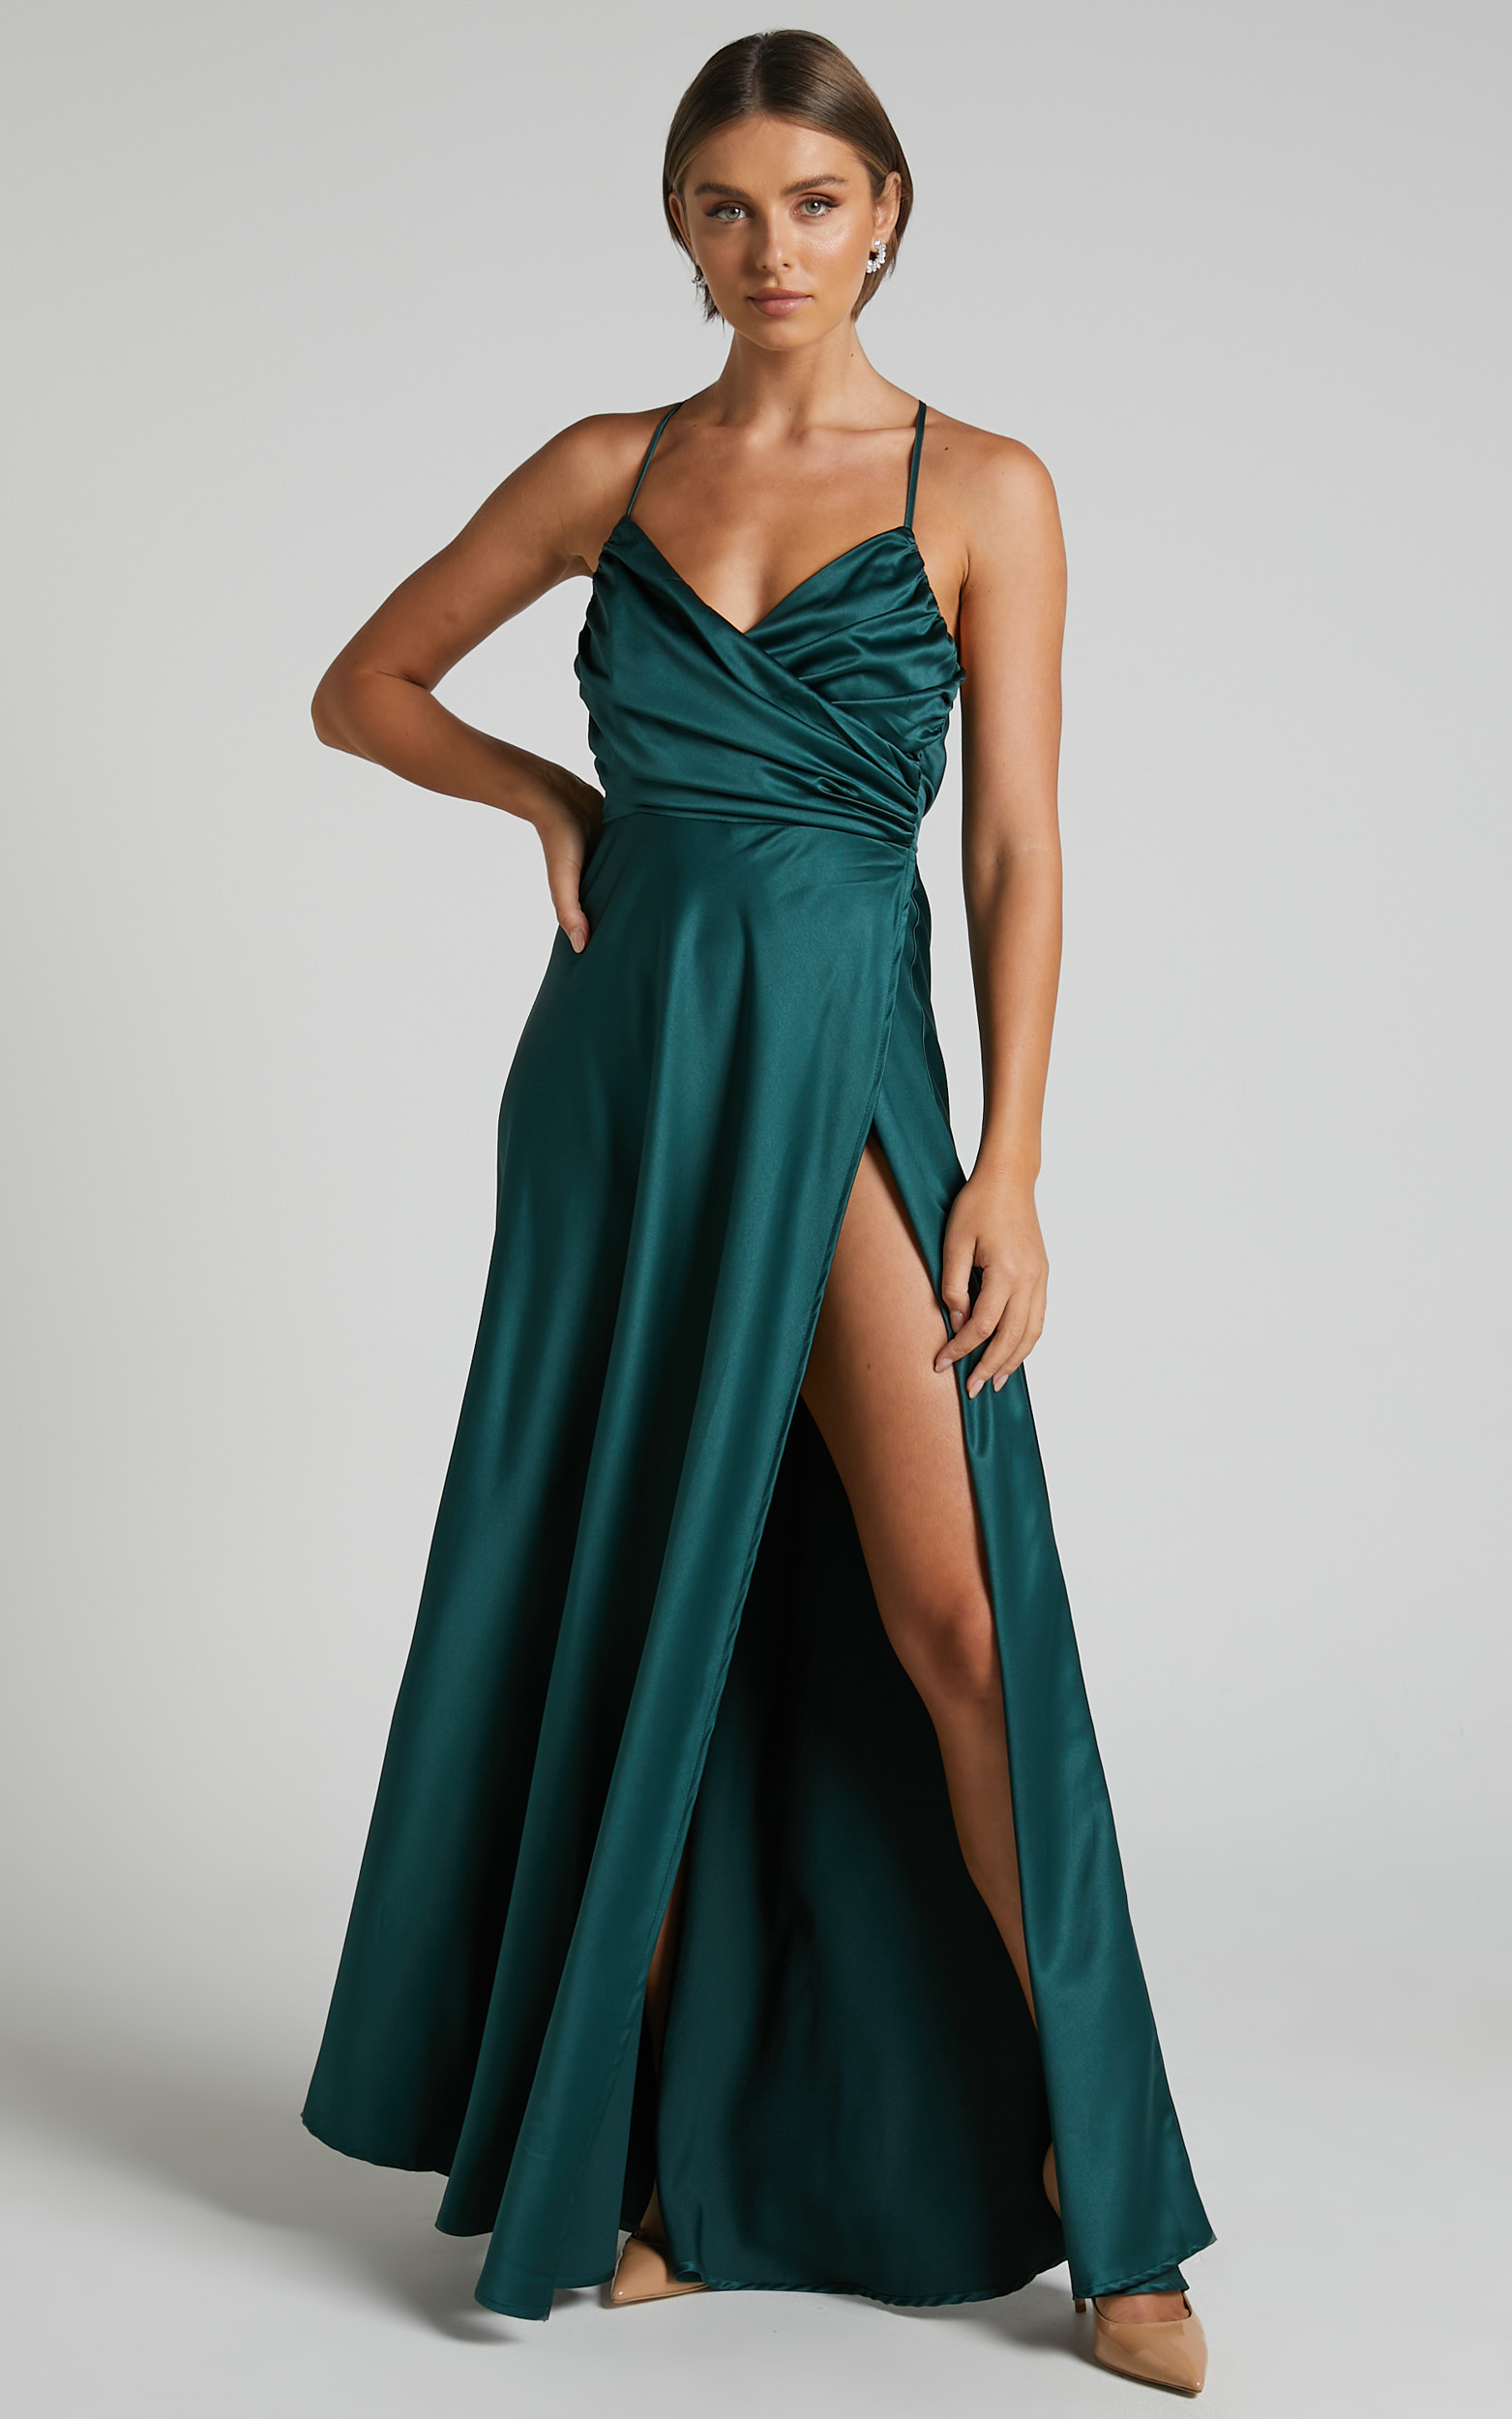 Chastine Maxi Dress - Ruched Bodice Front Satin Ball Gown in Emerald ...